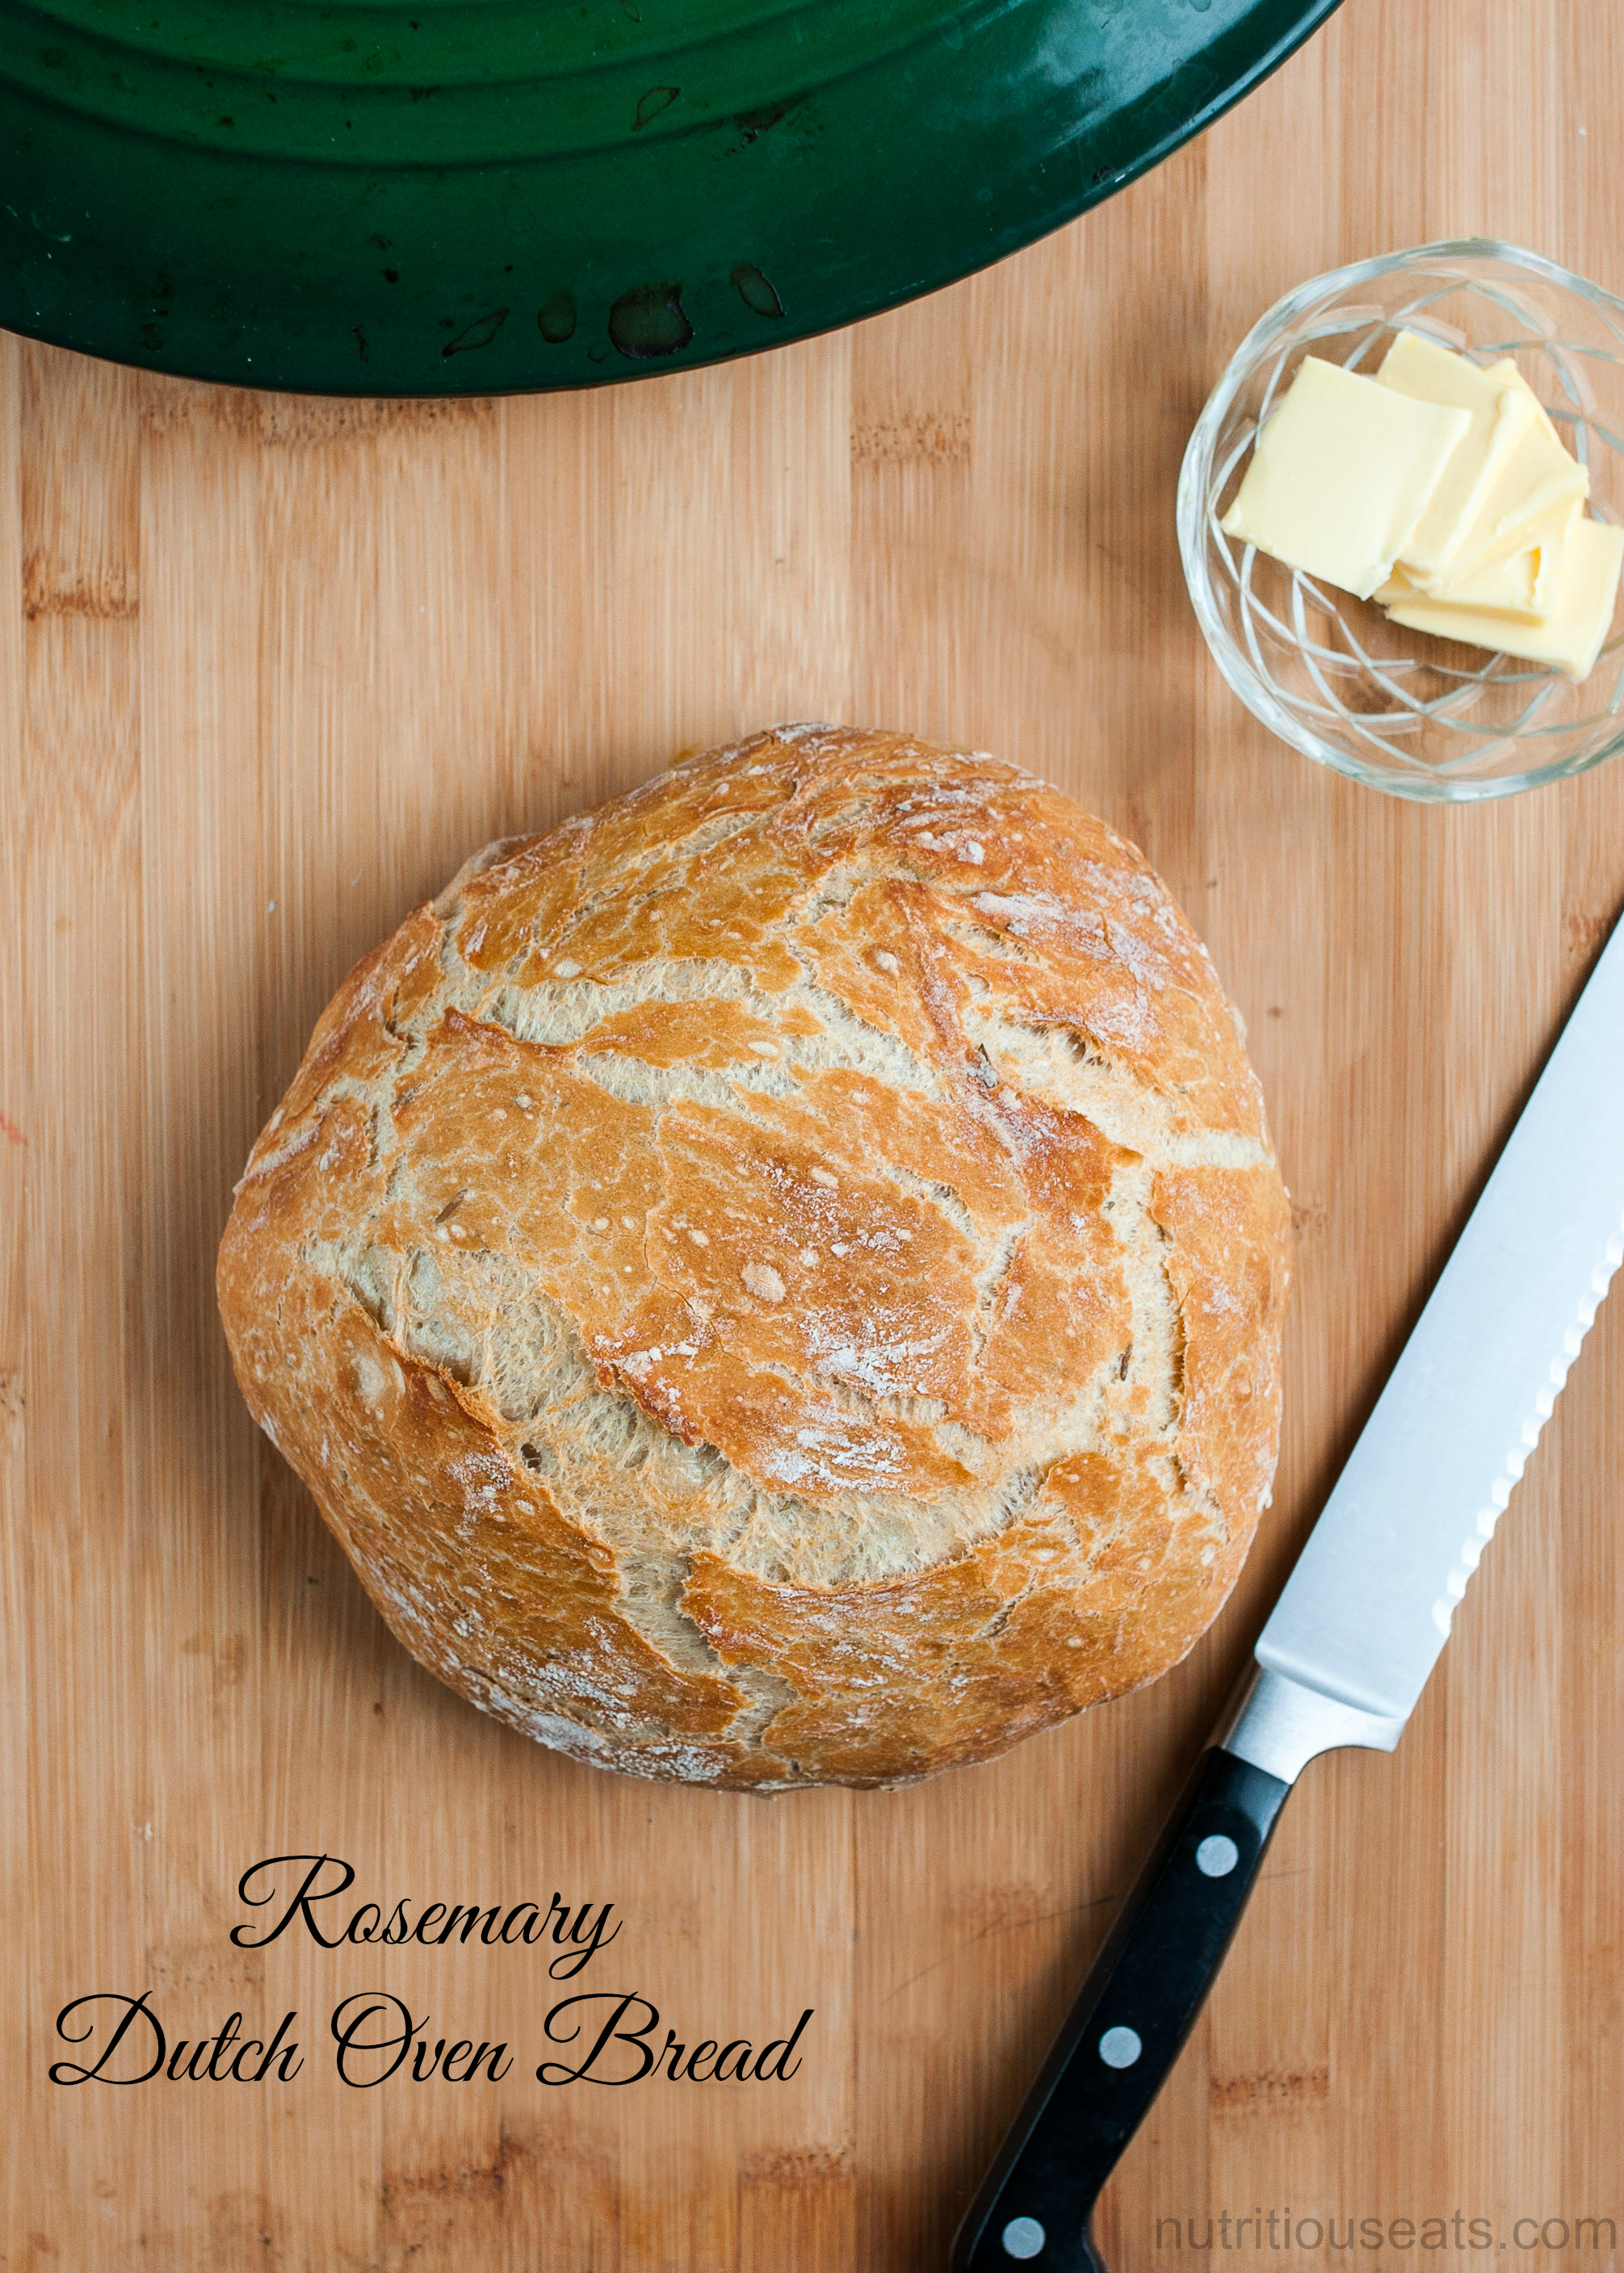 https://www.nutritiouseats.com/wp-content/uploads/2015/03/RosemaryDutchOvenBread-1-2-.jpg